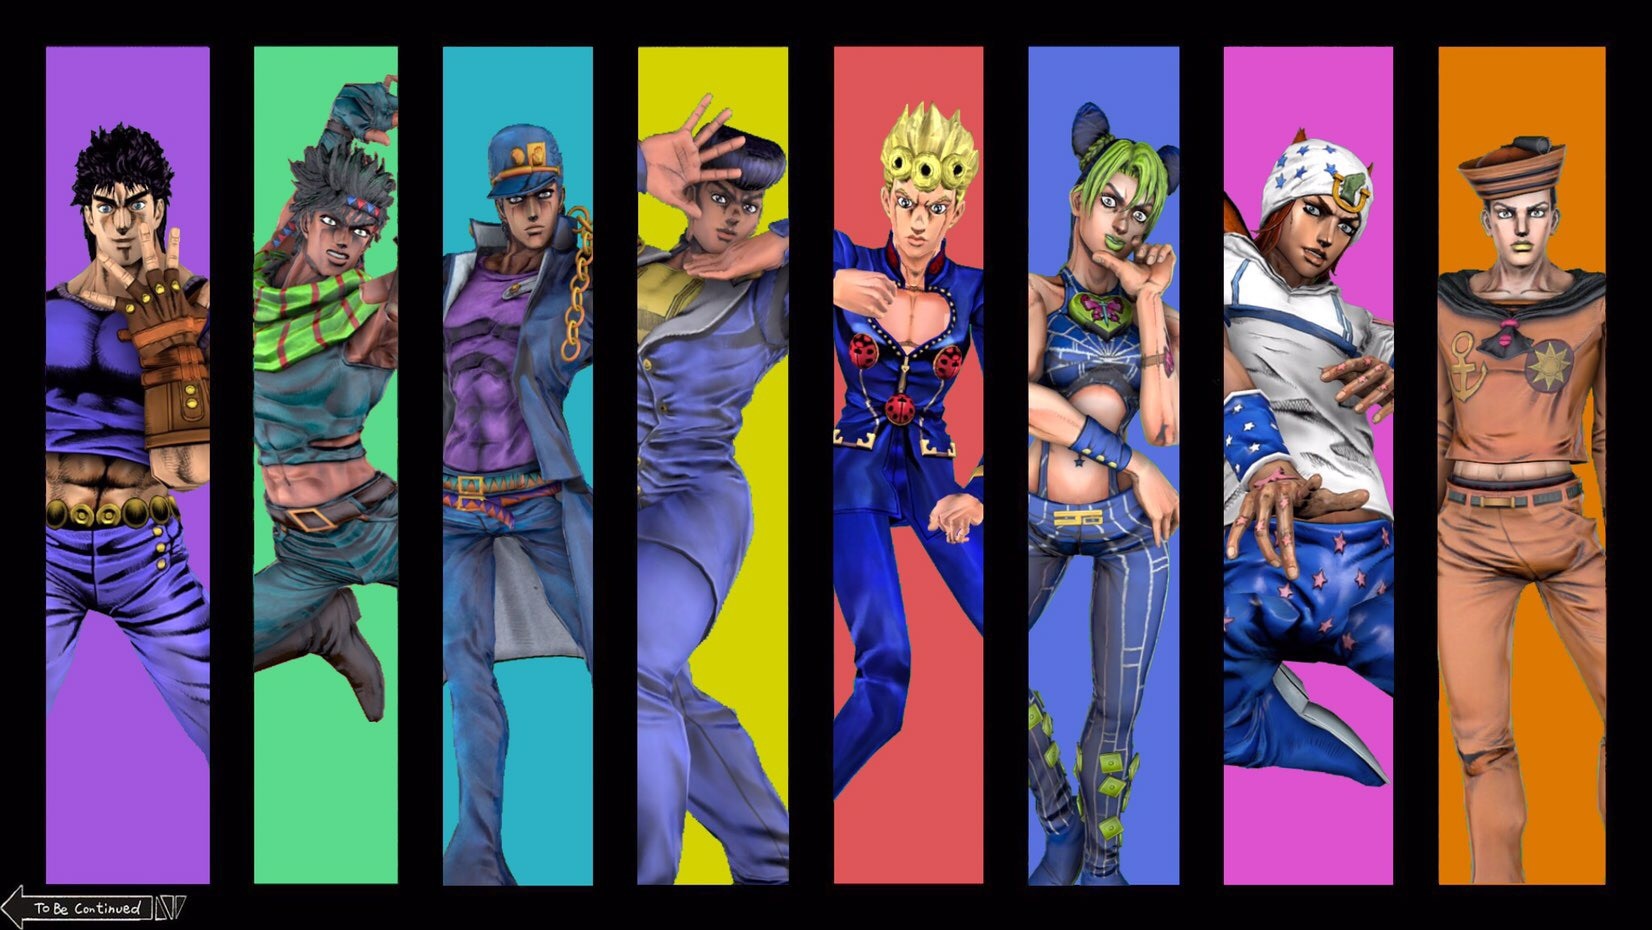 JoJo's Bizarre Adventure Creator Shares His Own Poses with Fans